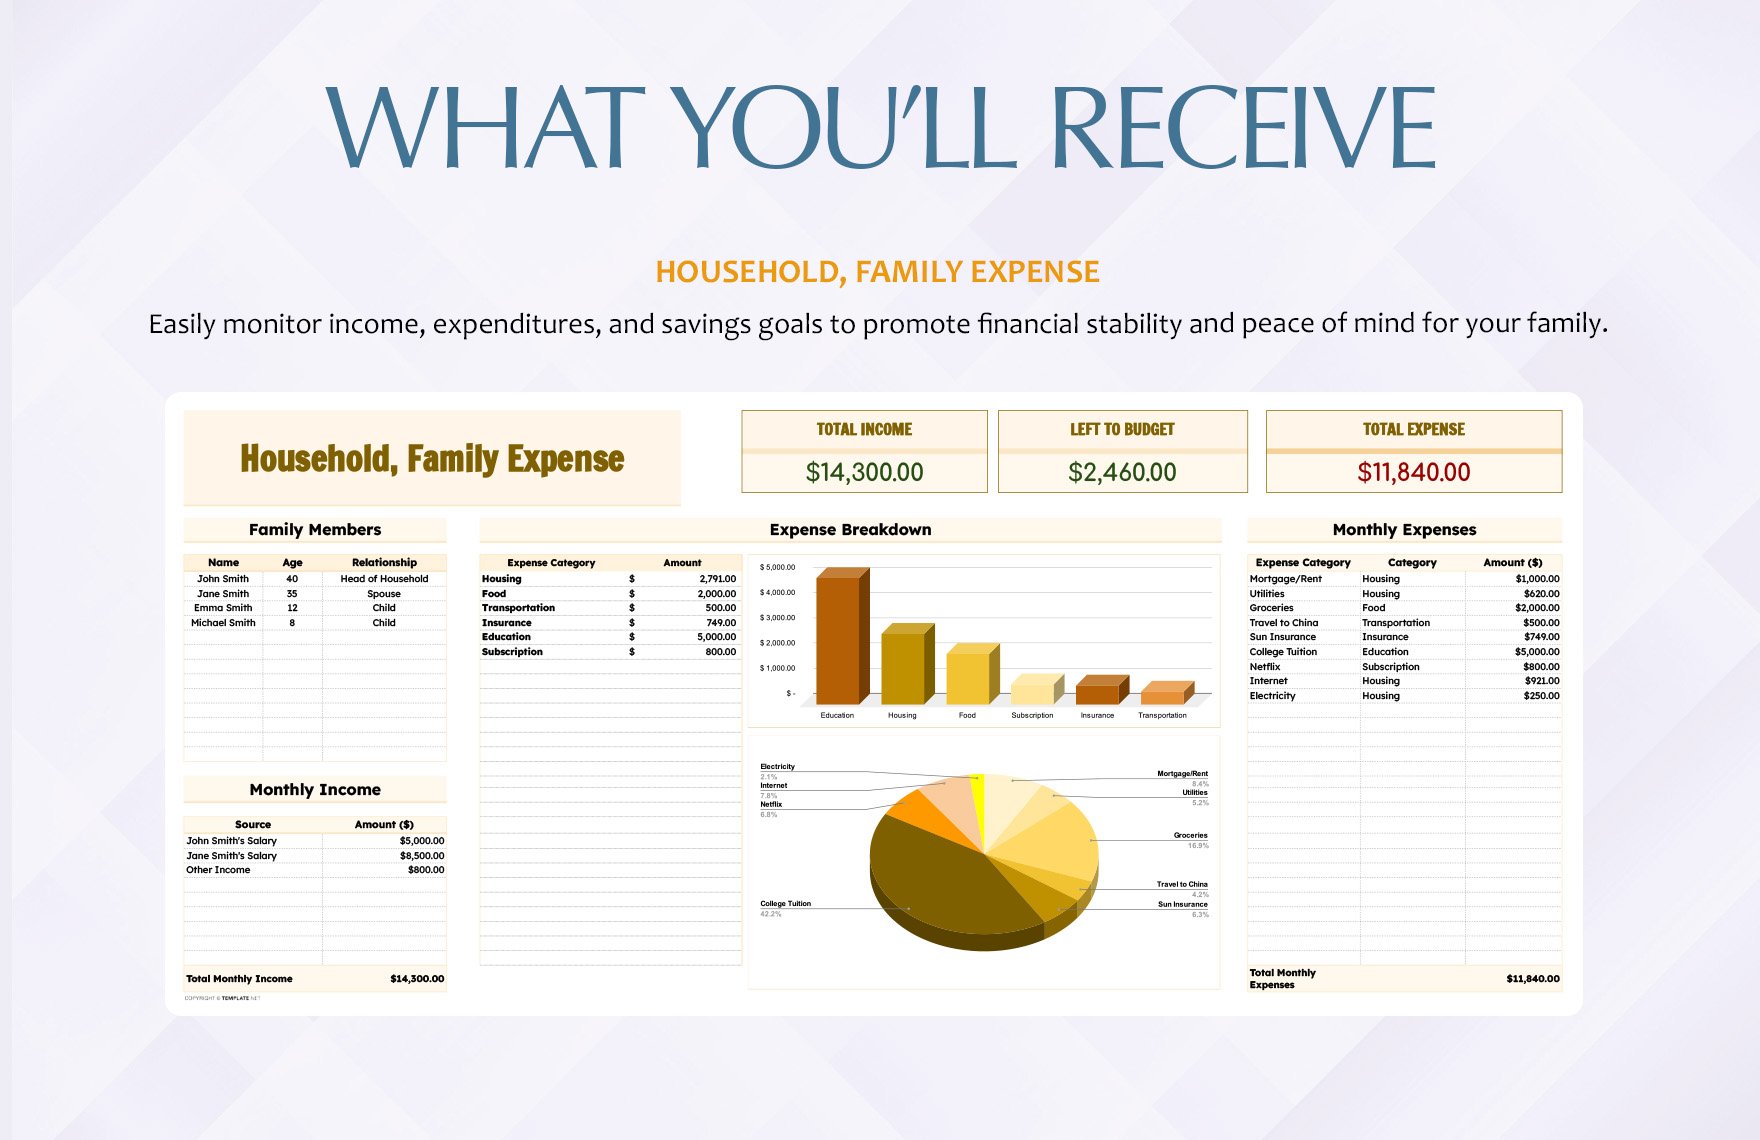 Household, Family Expense Template